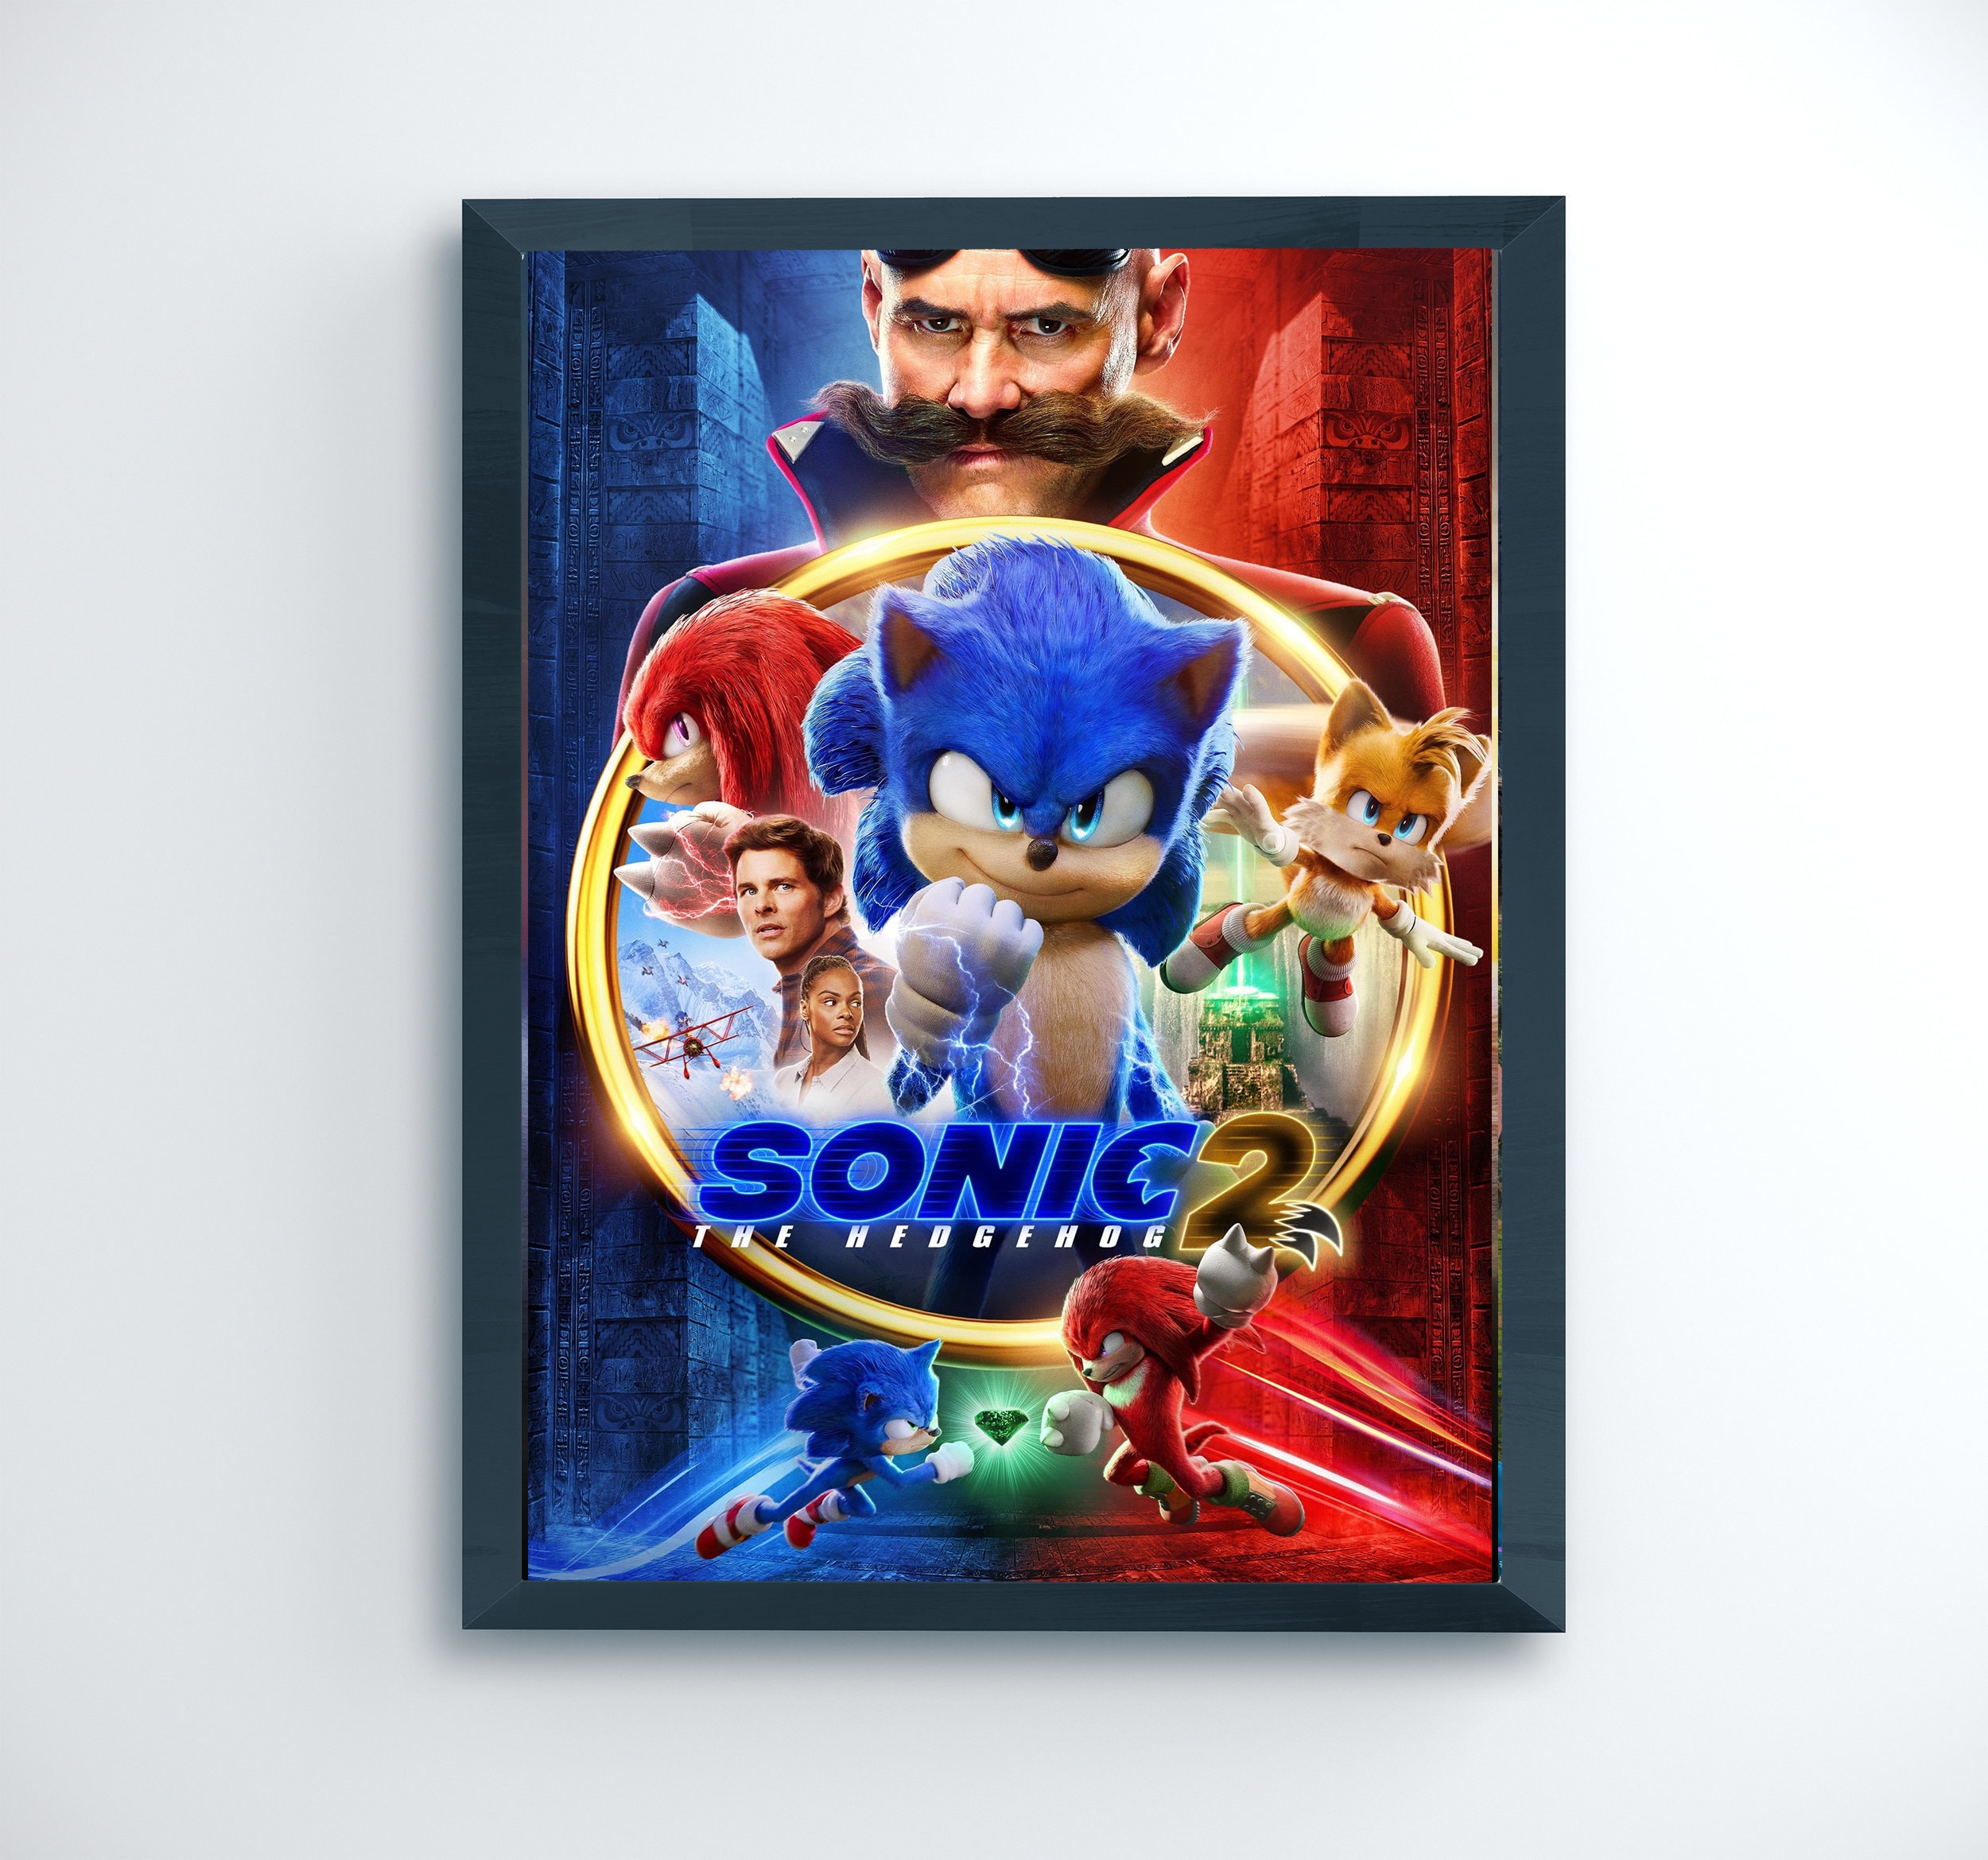 Sonic Movie 2 Poster Finished and Video Color By CraftyAn by craftyandy  -- Fur Affinity [dot] net